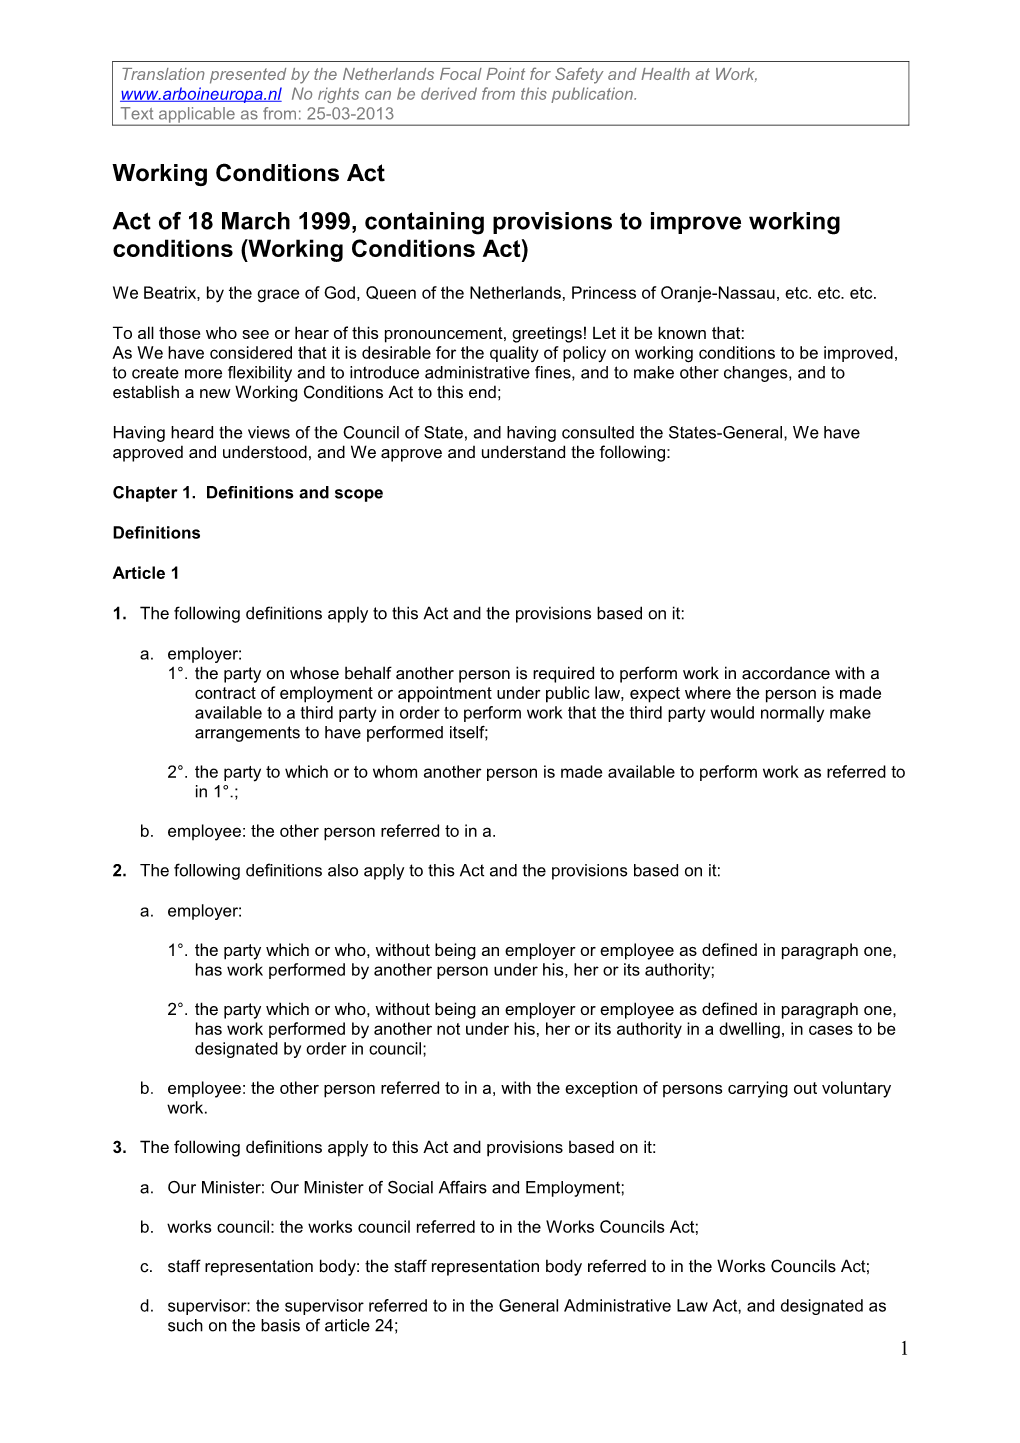 Working Conditions Act